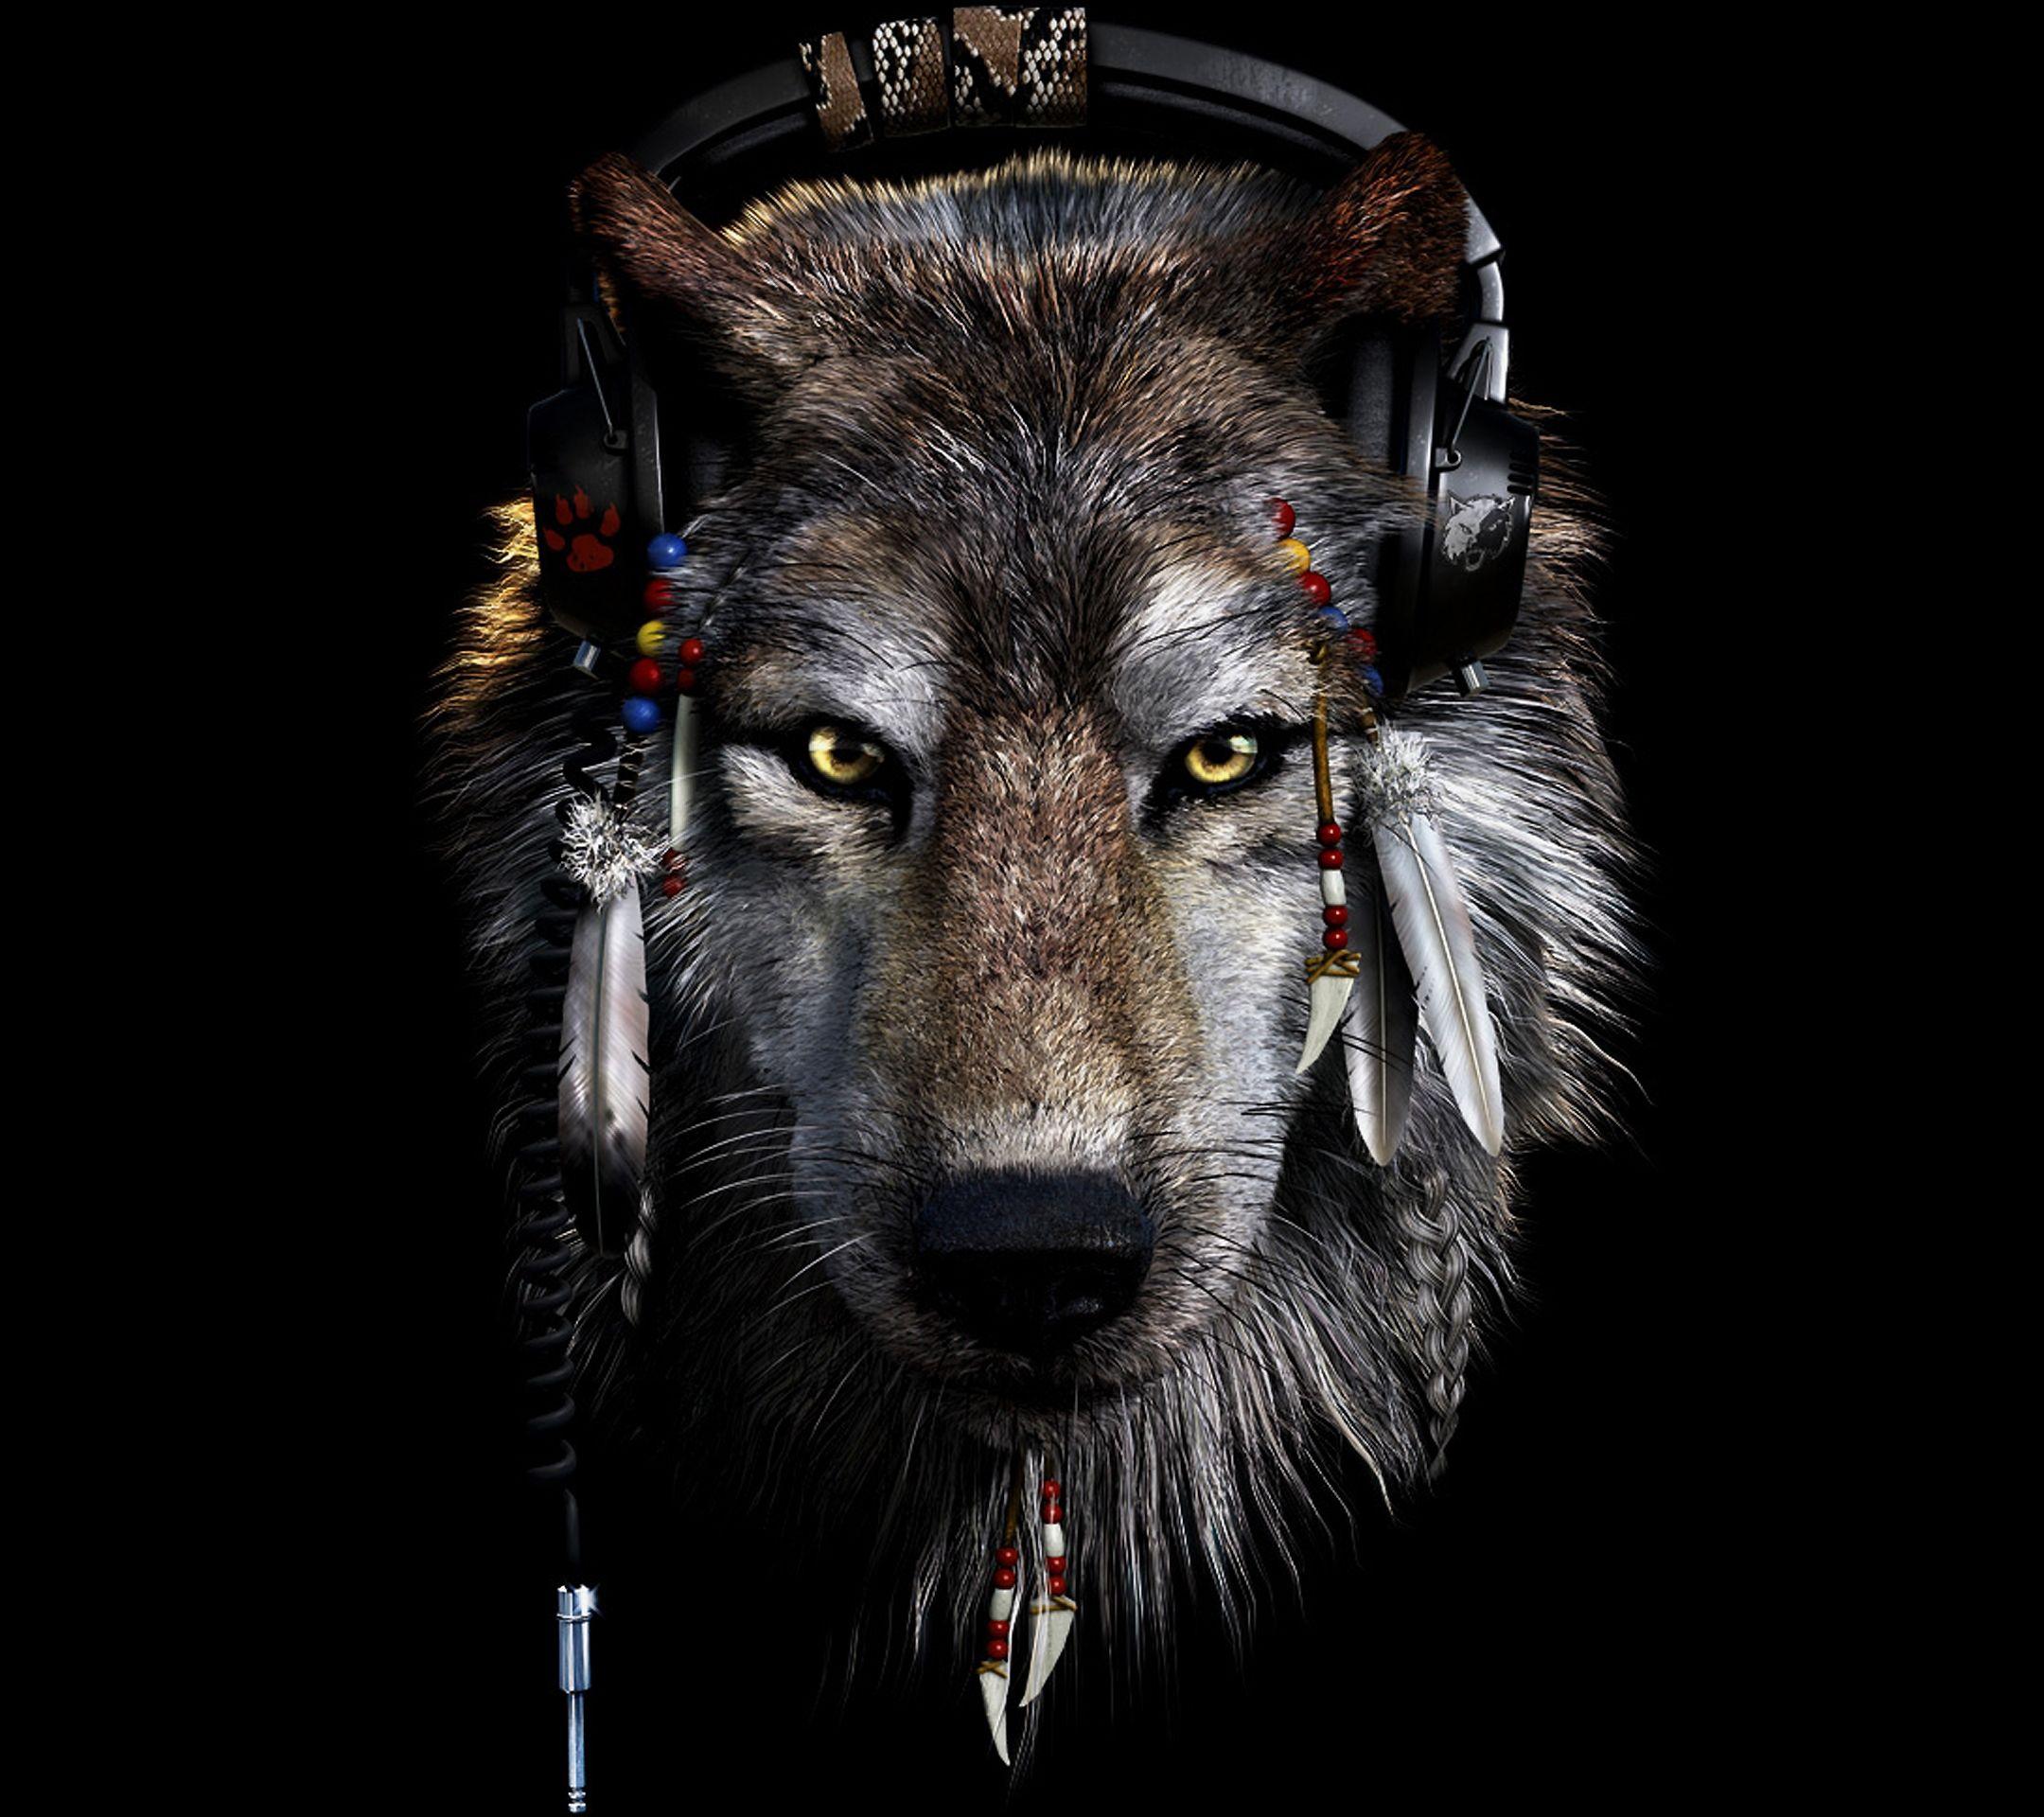 Indian and Wolf Wallpaper. Beautiful Wolf Wallpaper, Awesome Wolf Wallpaper and Pretty Wolf Wallpaper